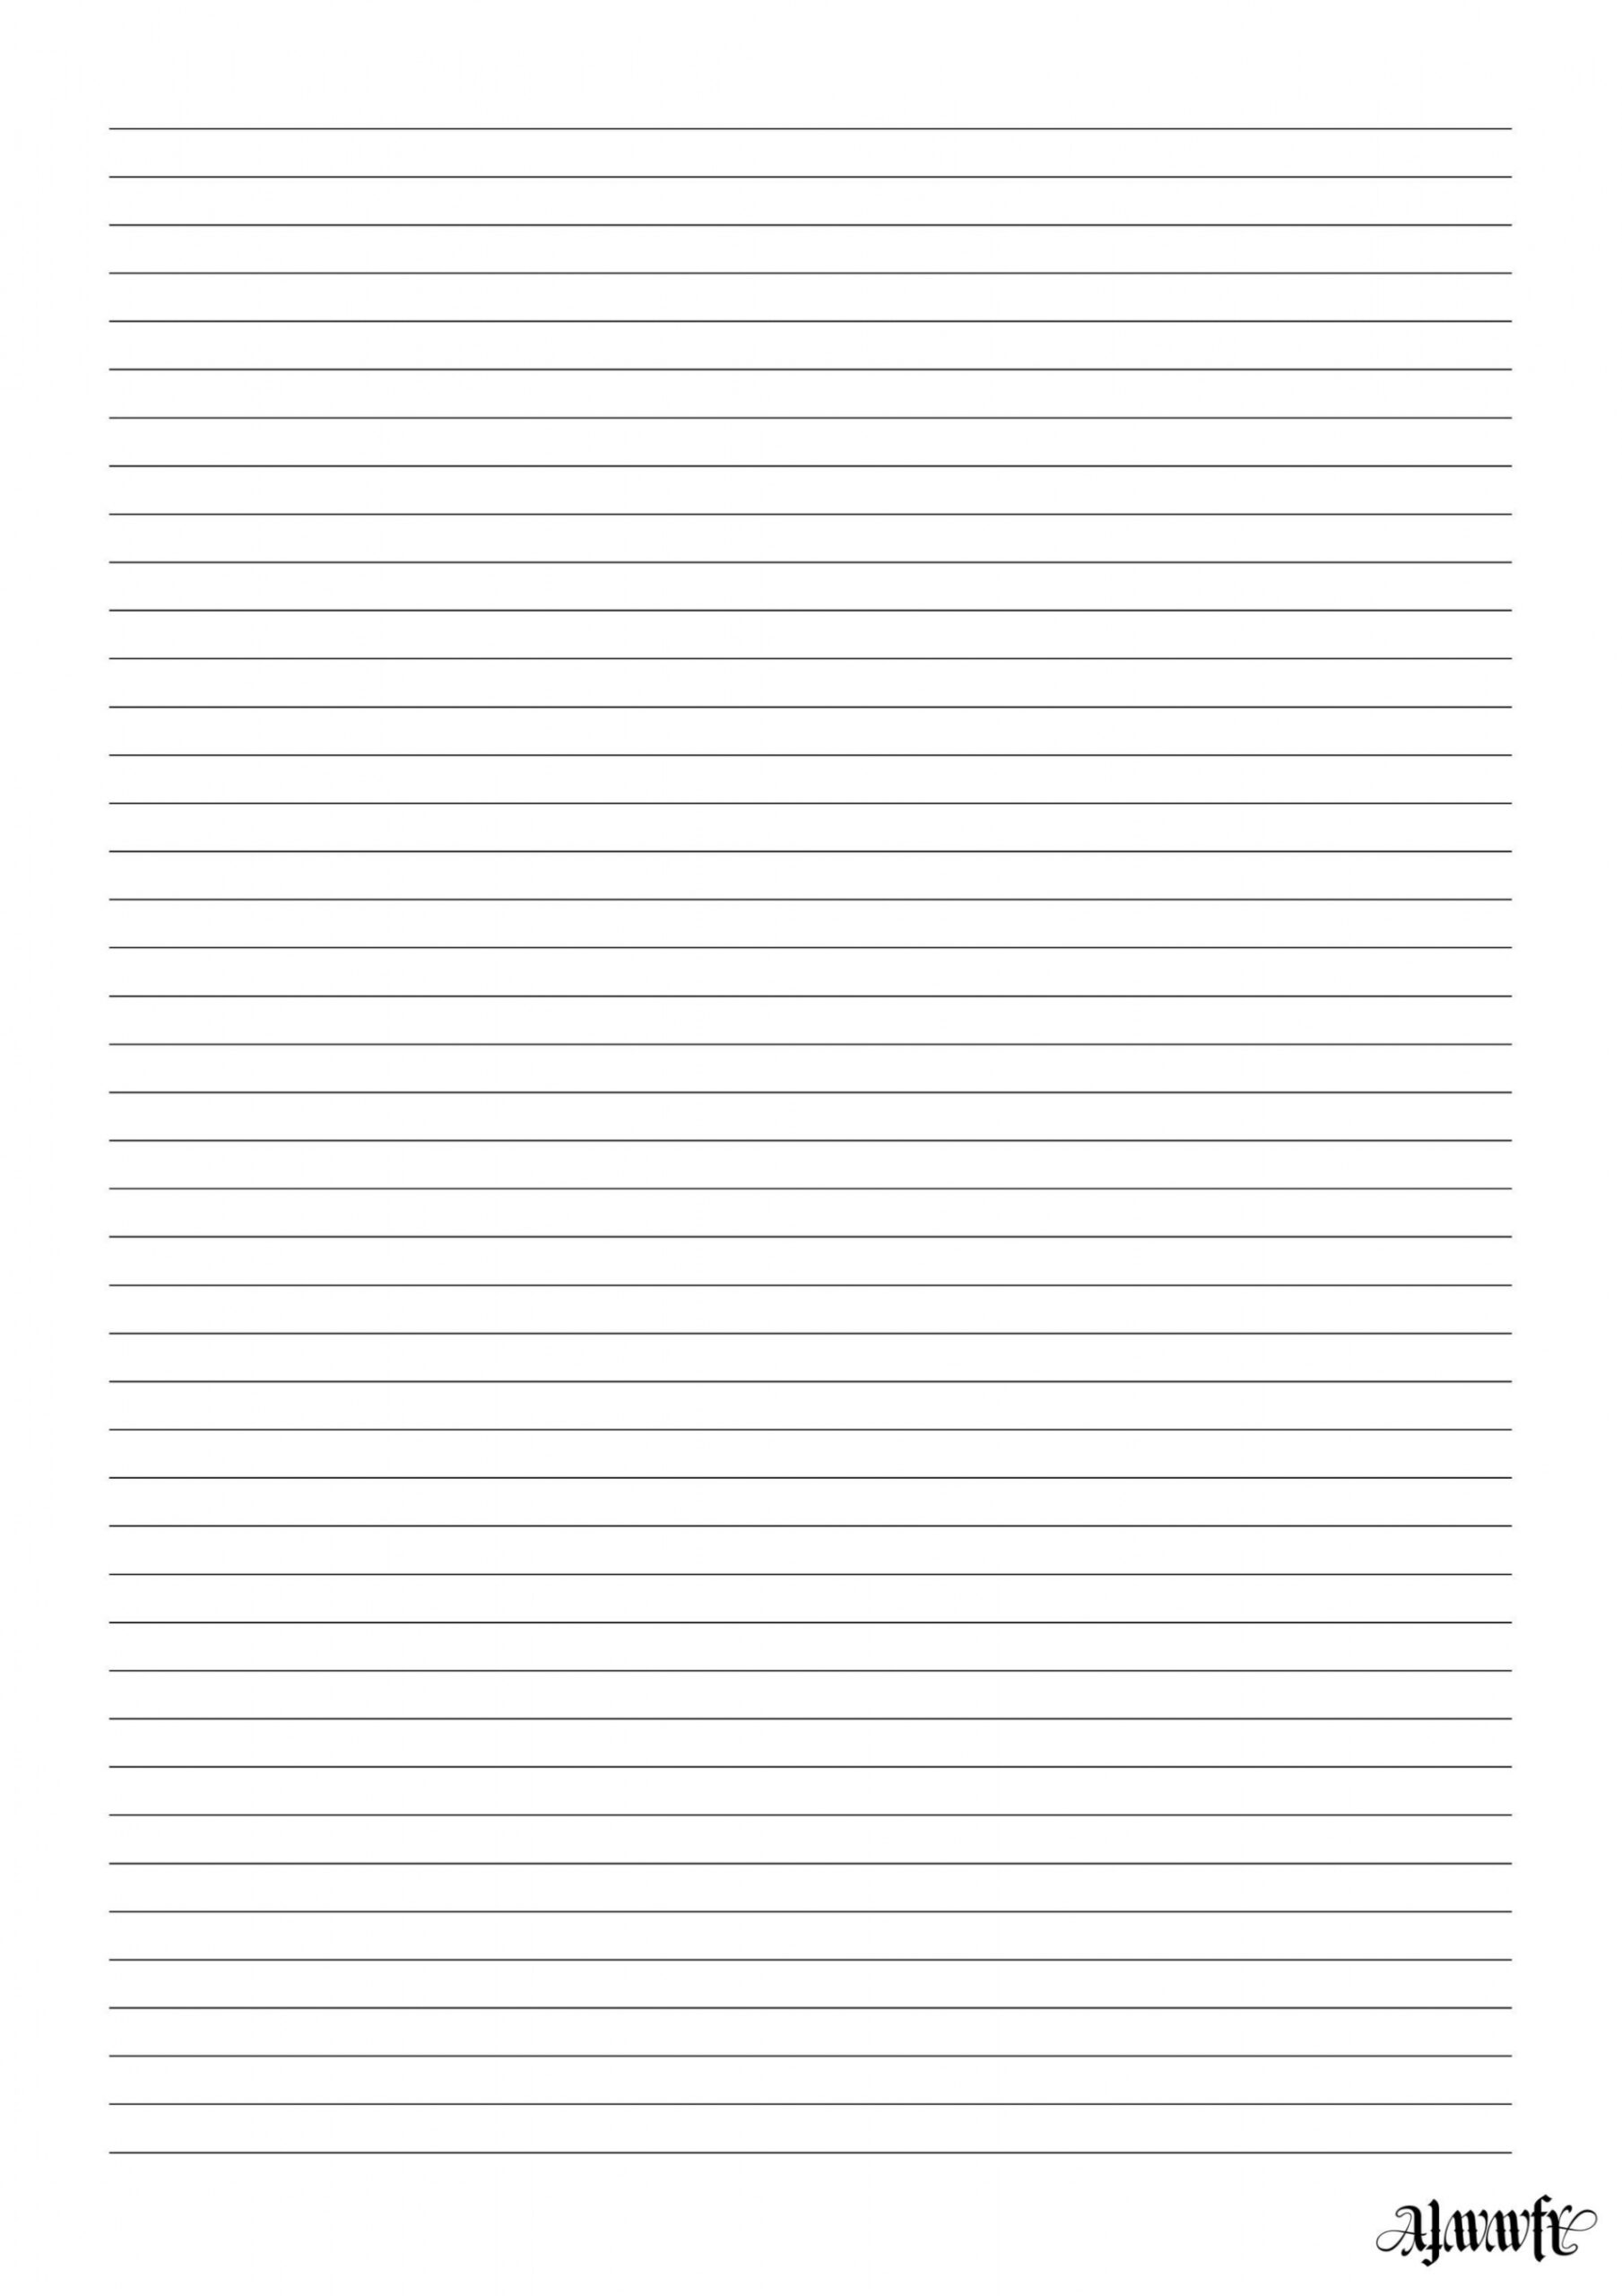 Lined Printable A paper, letter writing, personal use only - Writing Lined Paper